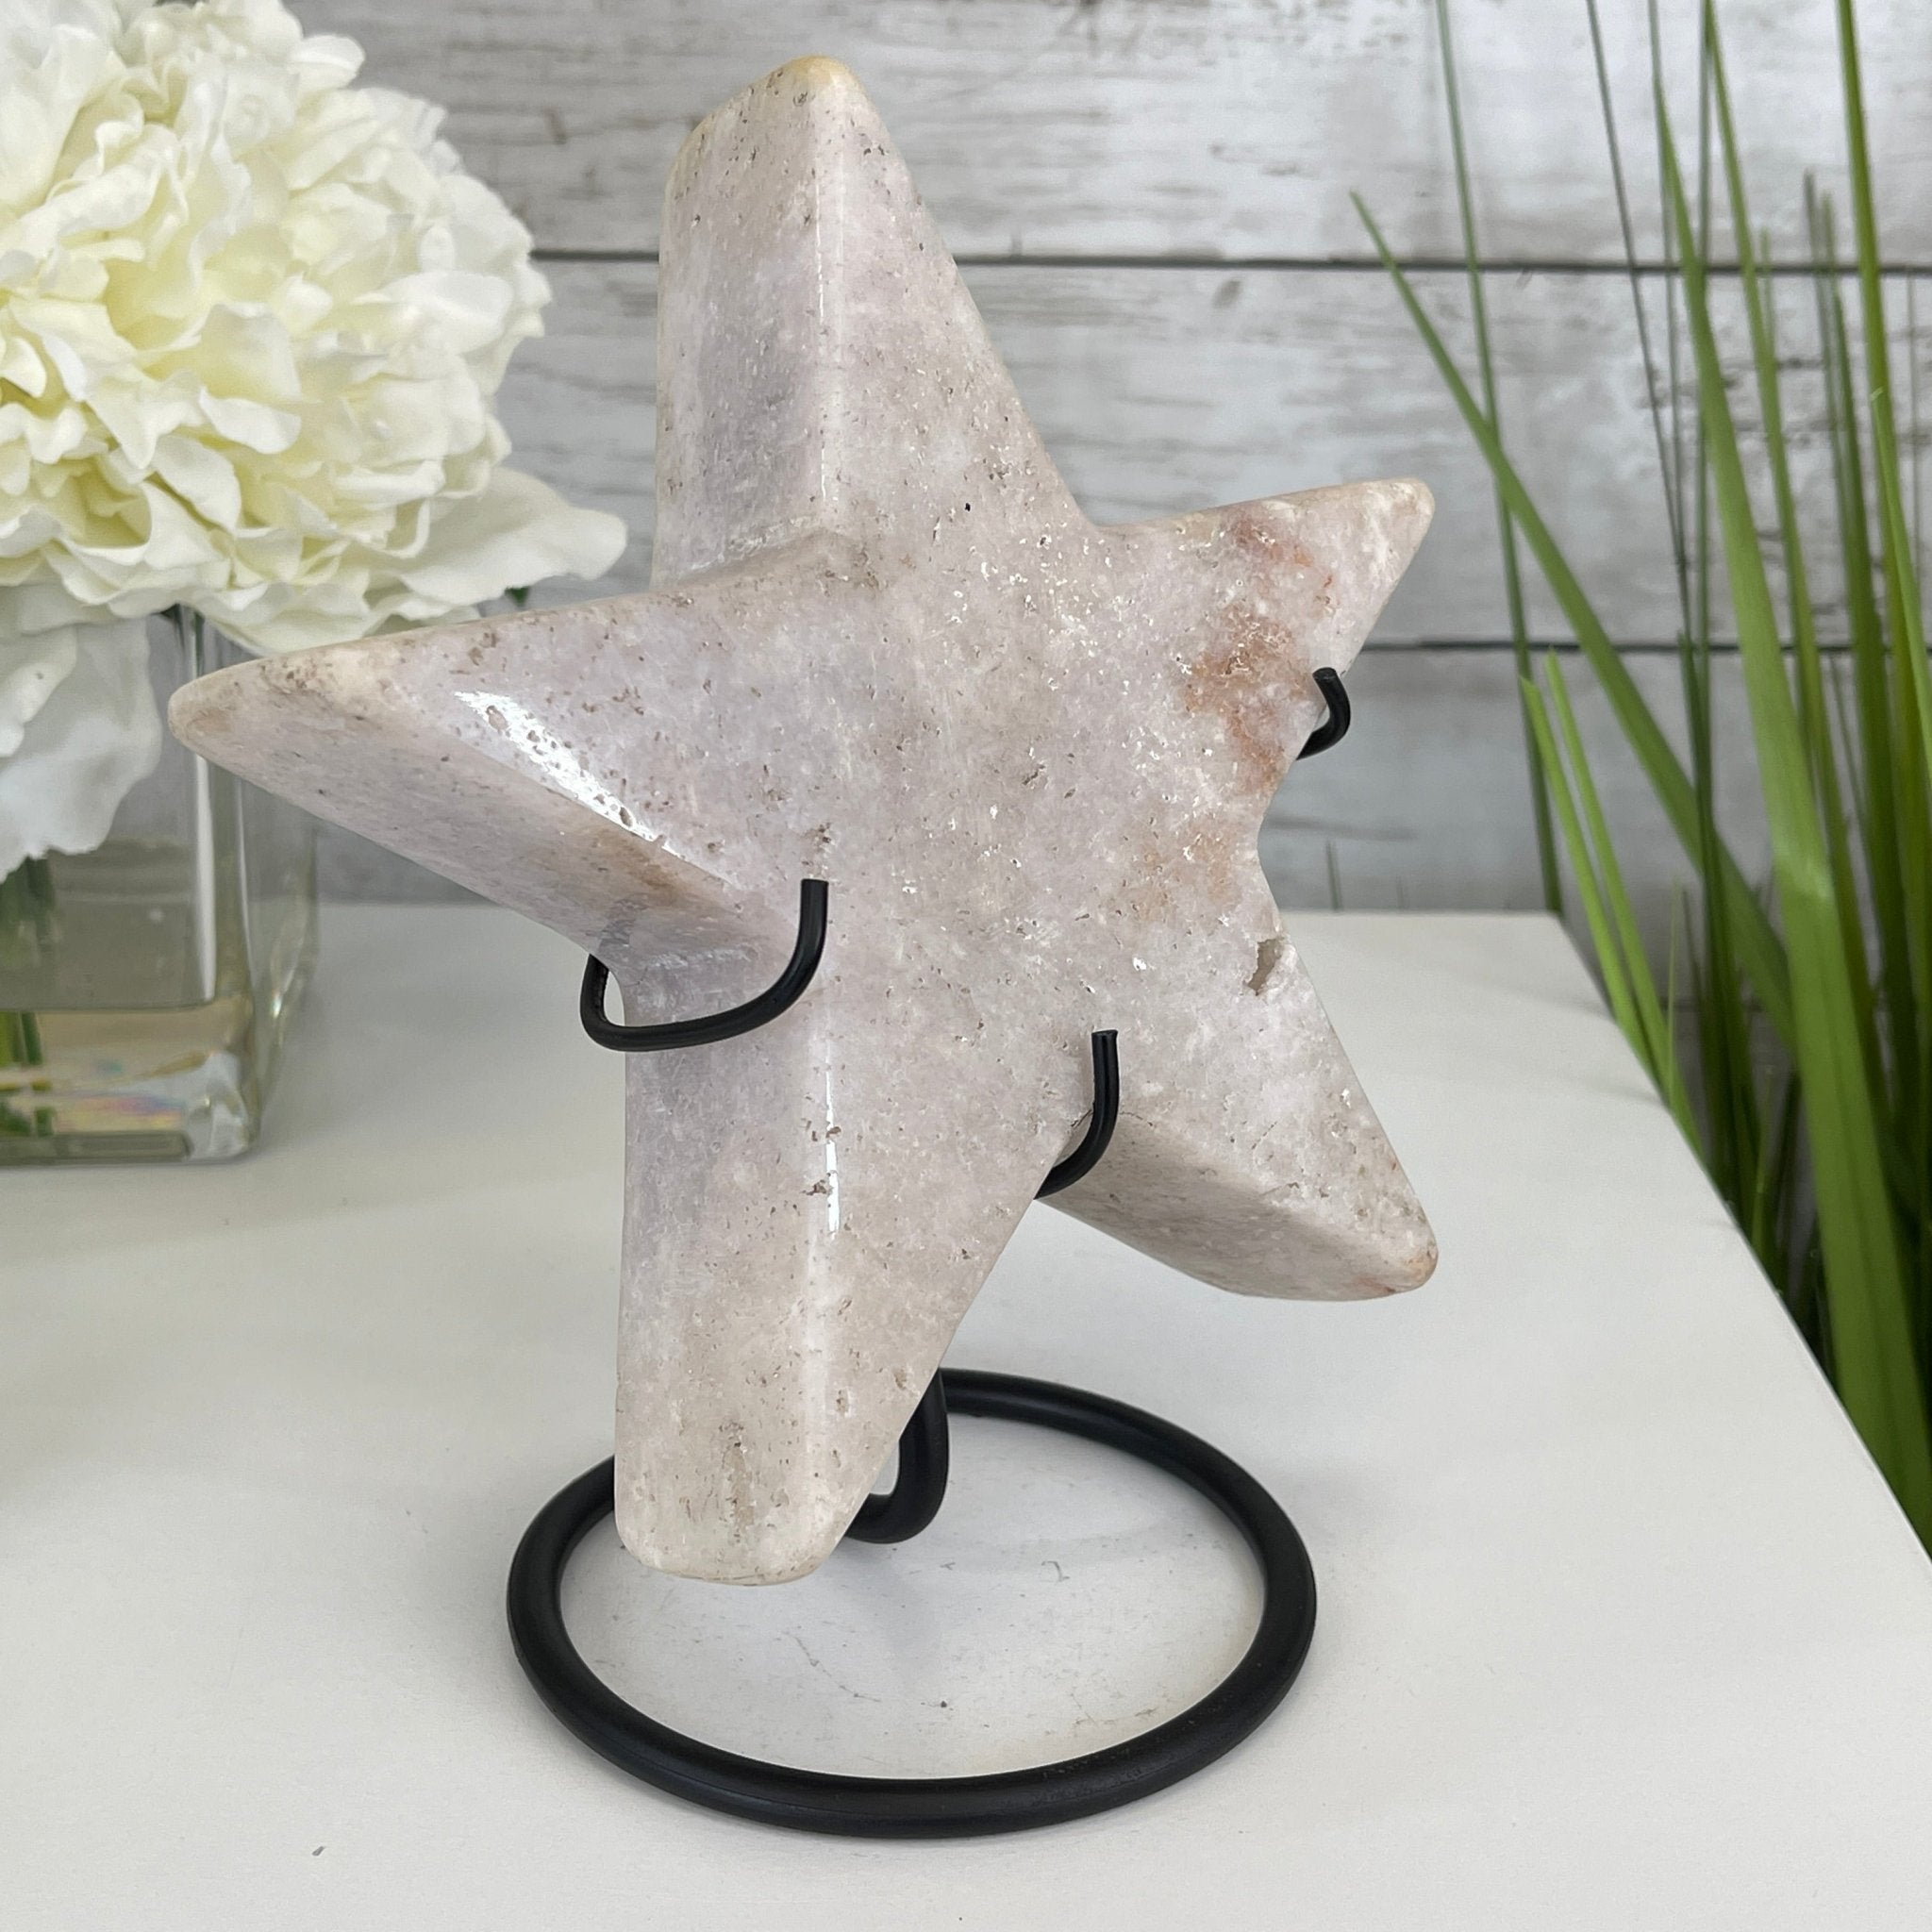 Pink Amethyst Star on a Metal Stand 7.6" Tall #5746-0018 by Brazil Gems - Brazil GemsBrazil GemsPink Amethyst Star on a Metal Stand 7.6" Tall #5746-0018 by Brazil GemsStars5746-0018